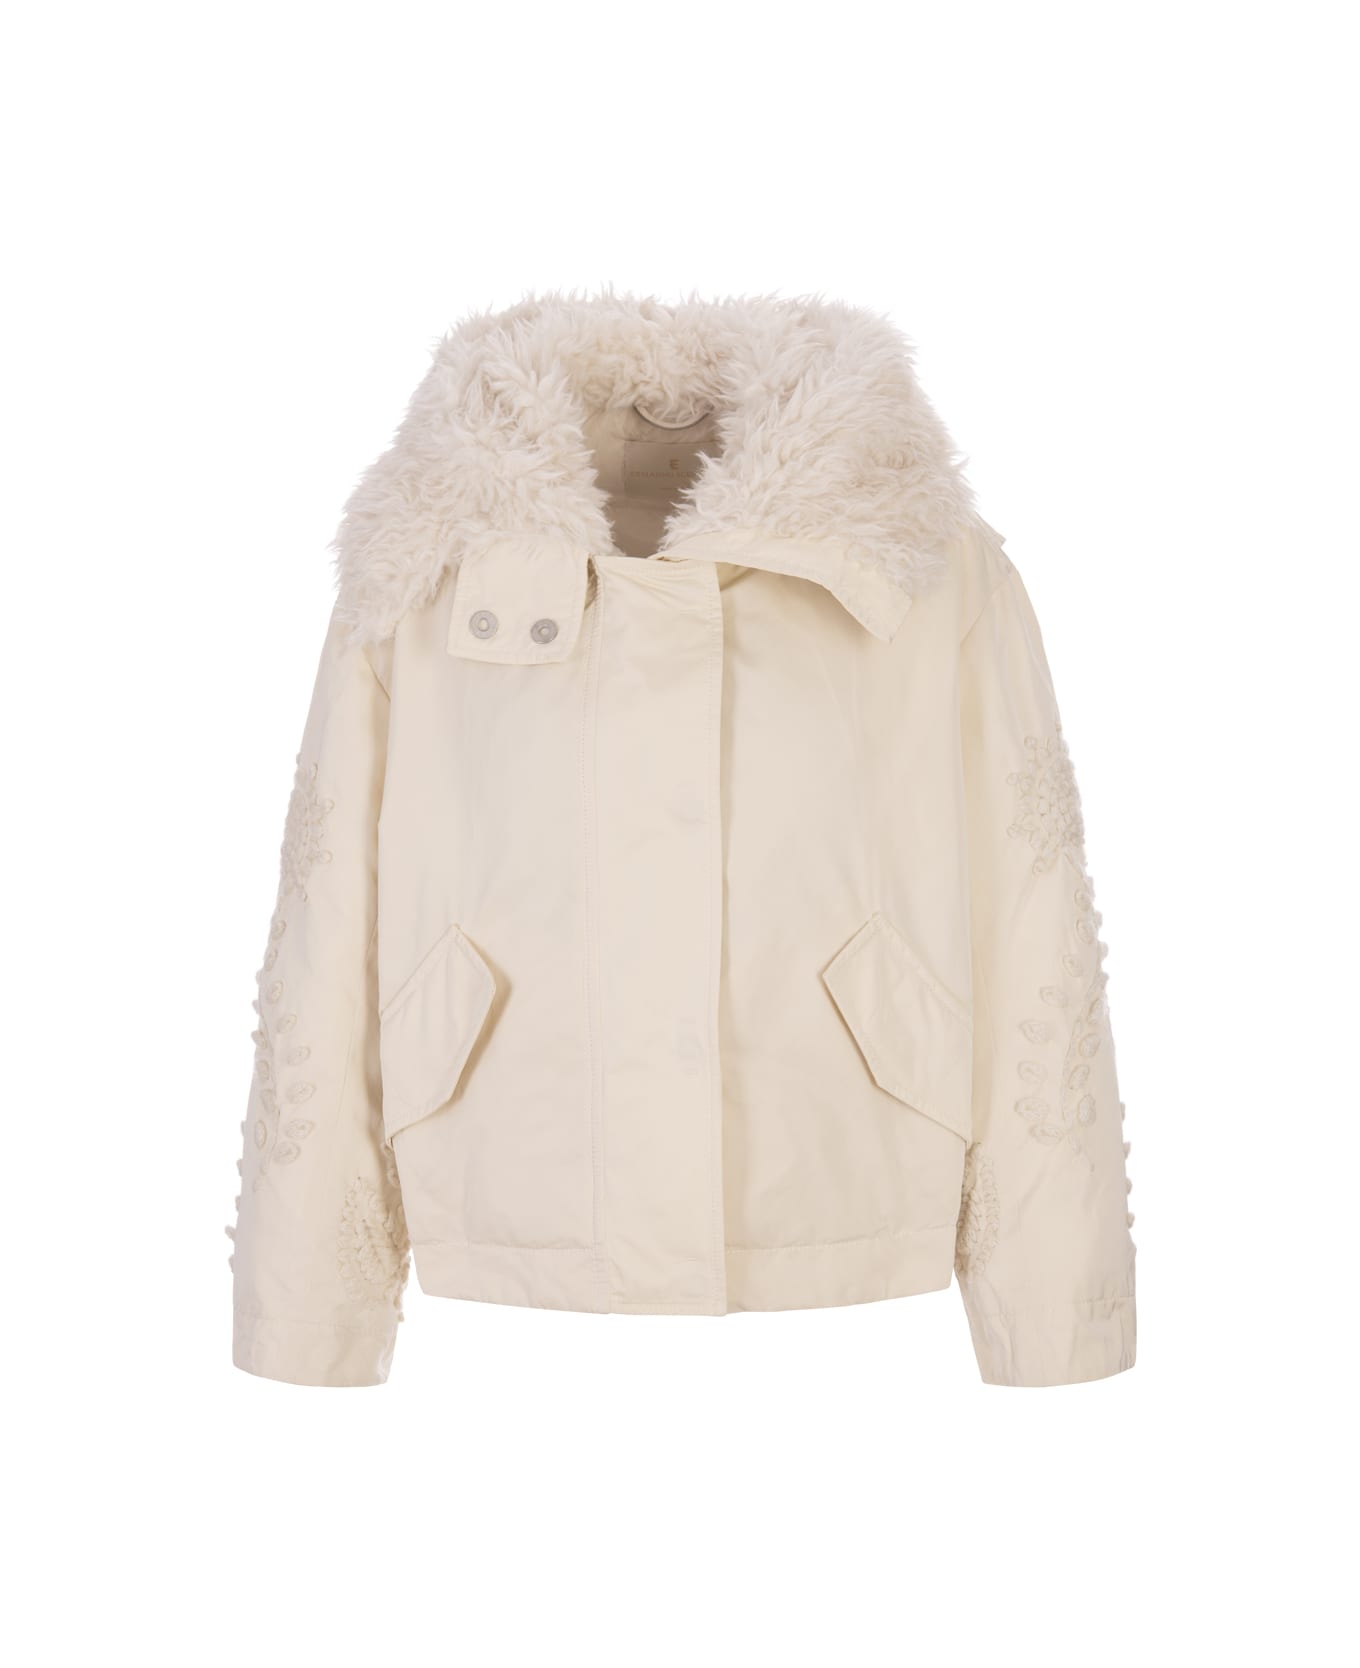 Ermanno Scervino White Jacket With Embroidery On Sleeves - White